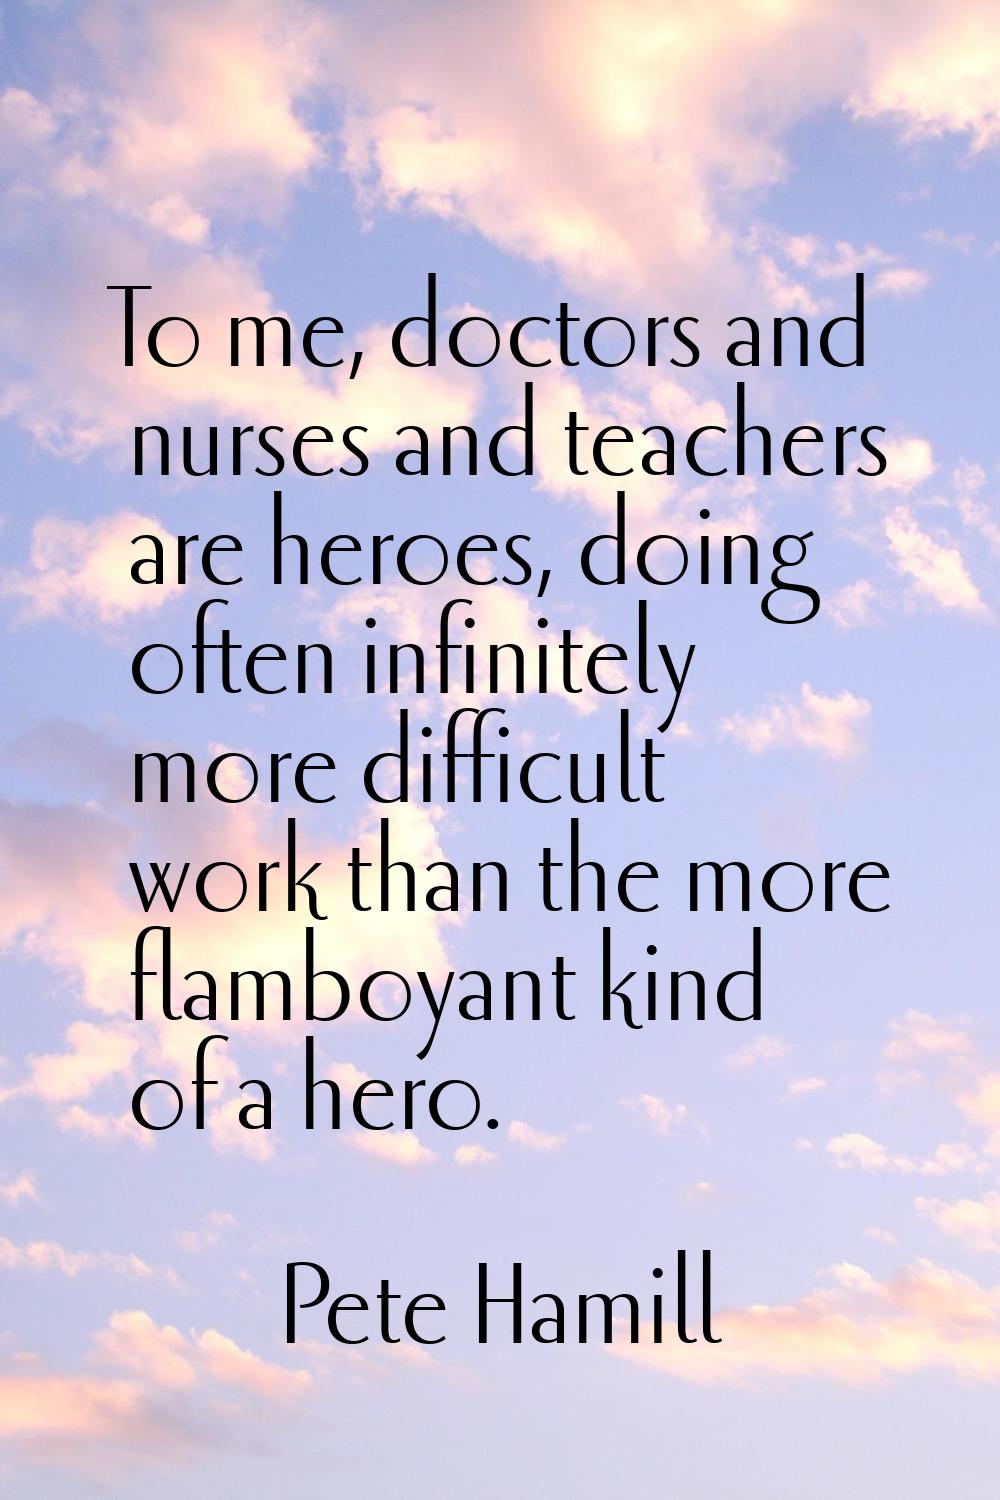 To me, doctors and nurses and teachers are heroes, doing often infinitely more difficult work than 